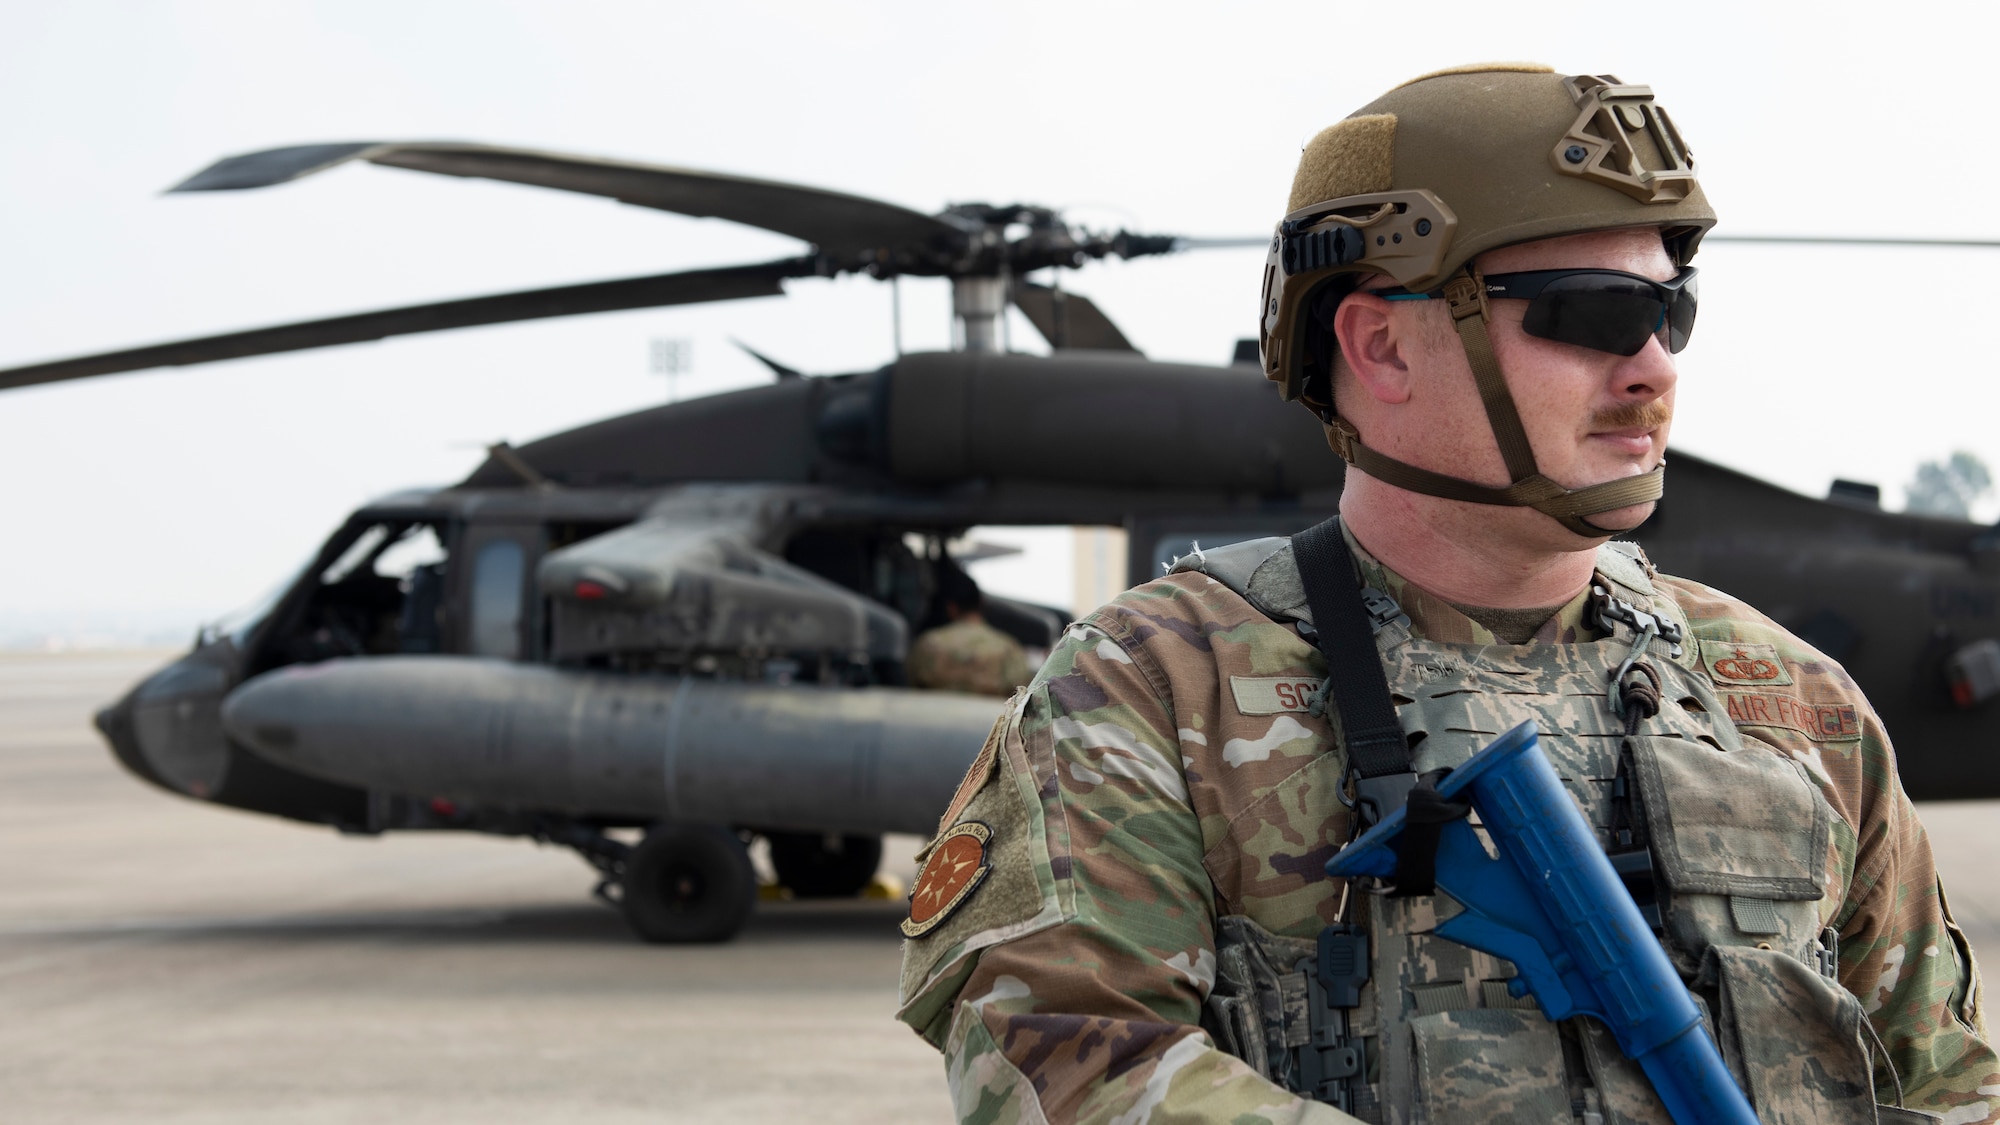 Airman guarding helicopter